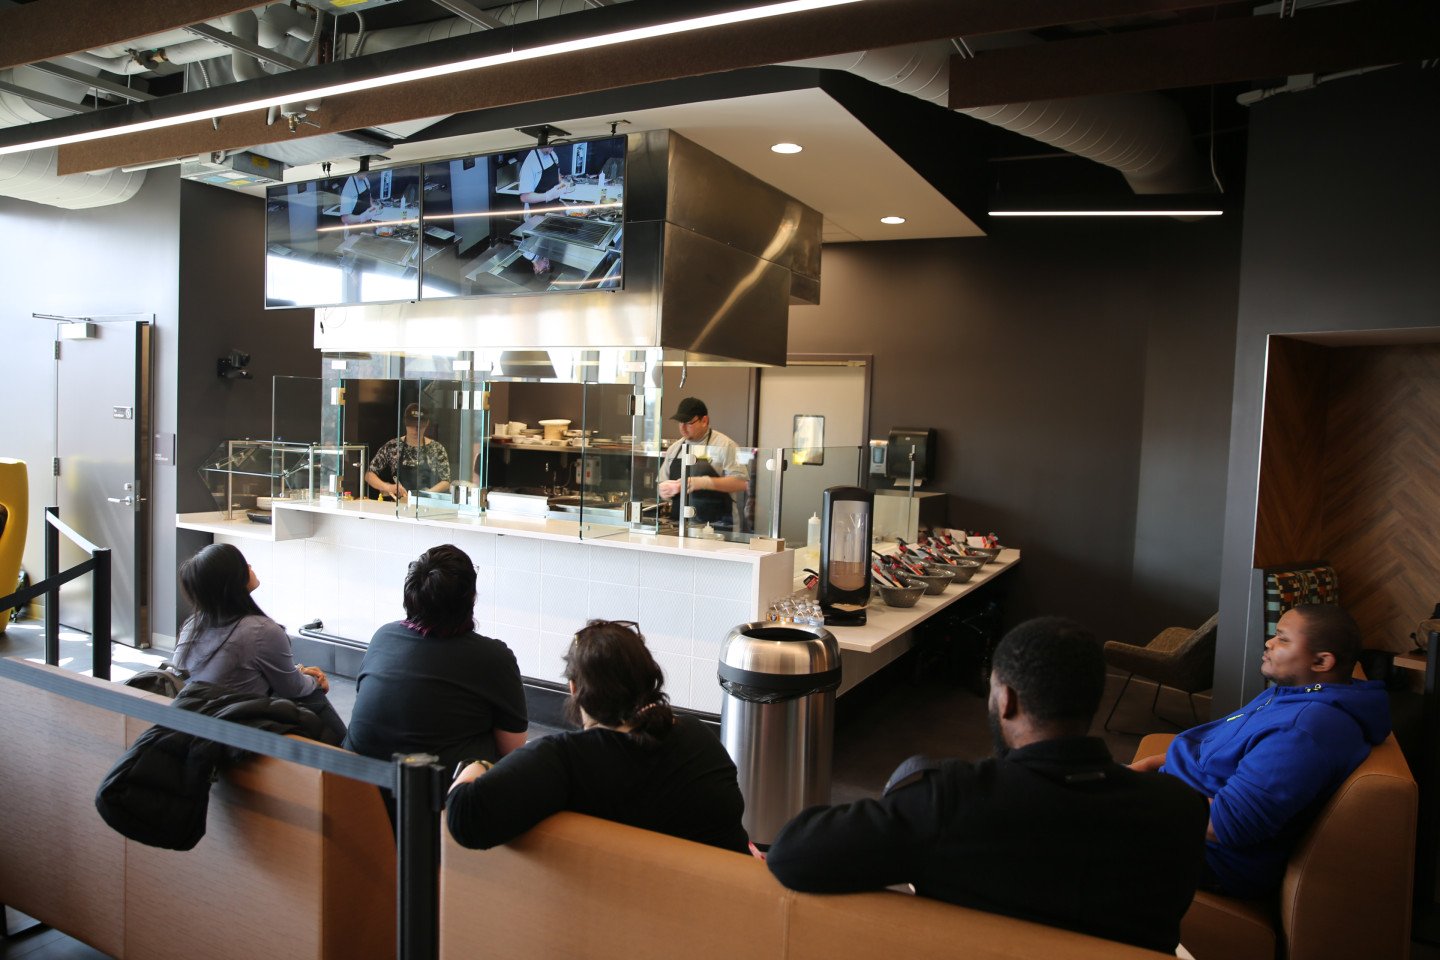 Chef Francisco cooking a quesadilla in the demo kitchen in the WMU Student Center with students watching.